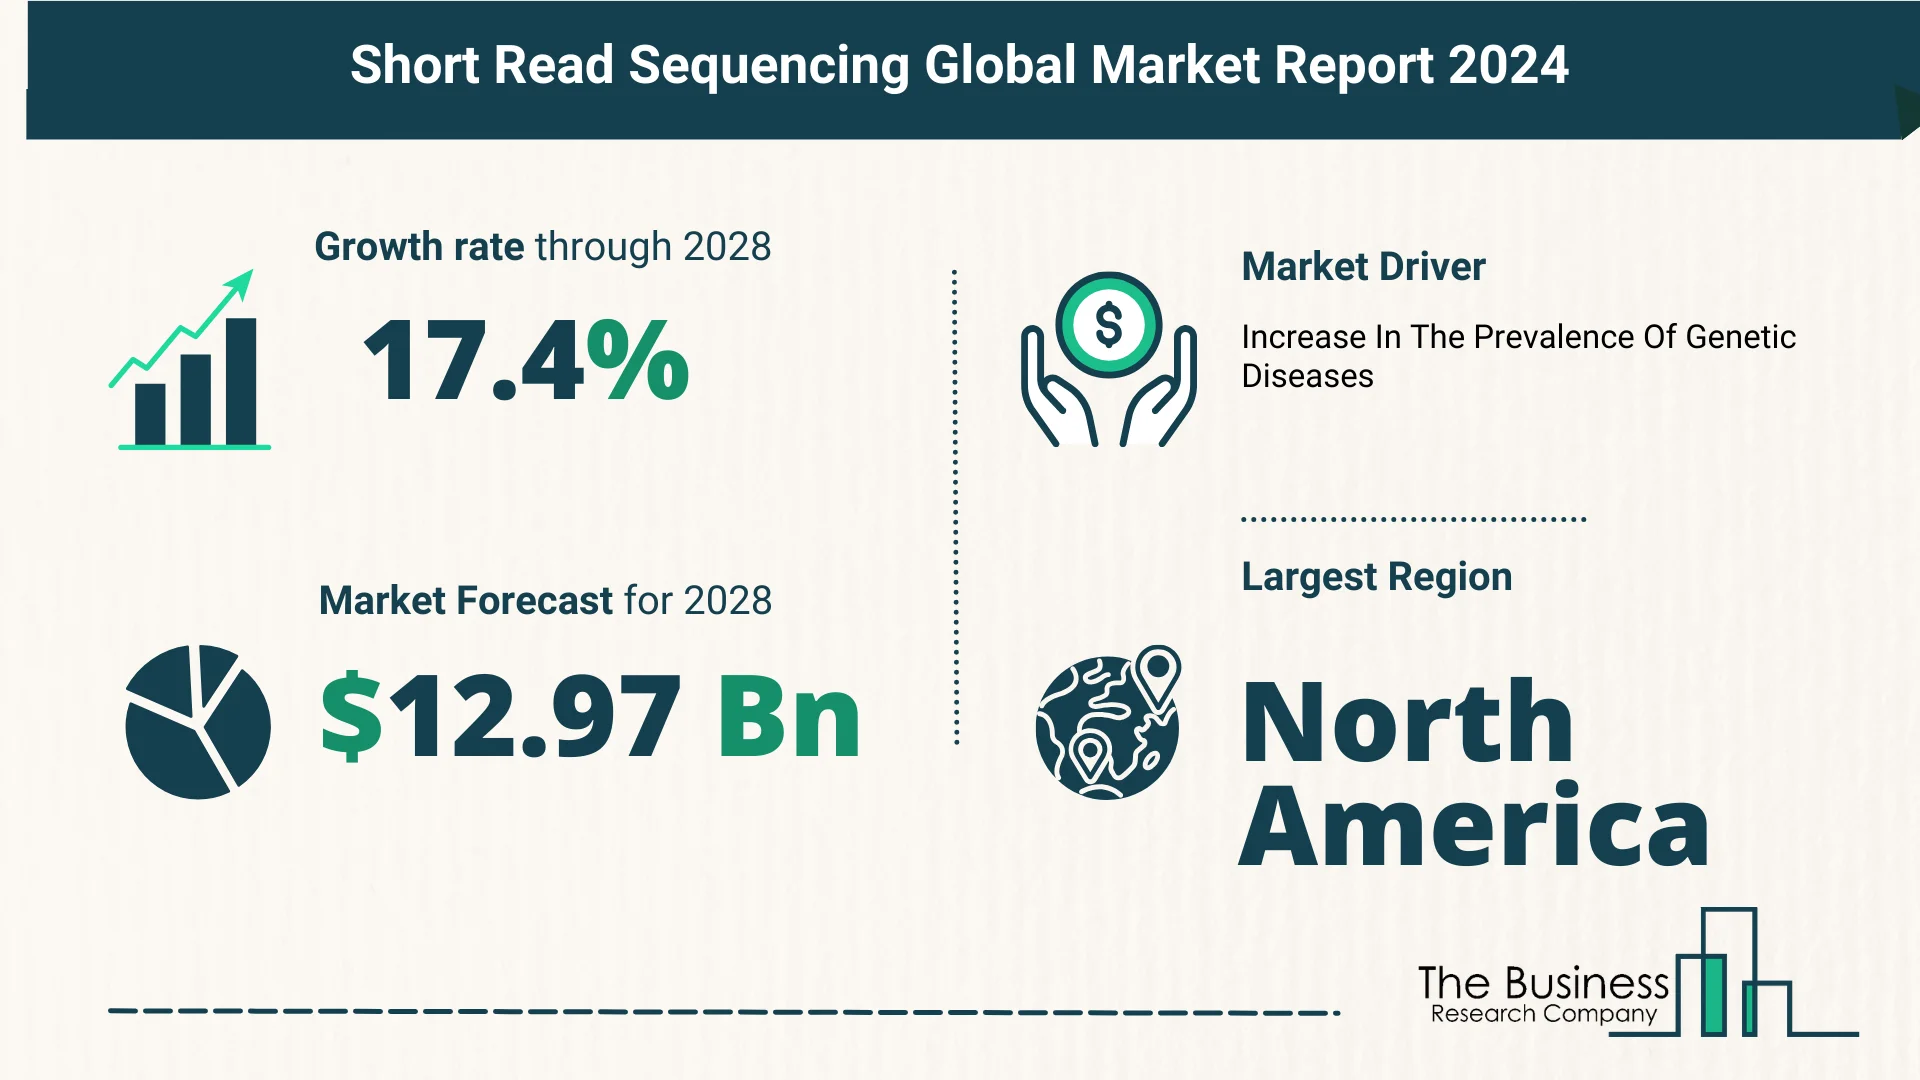 Top 5 Insights From The Short Read Sequencing Market Report 2024